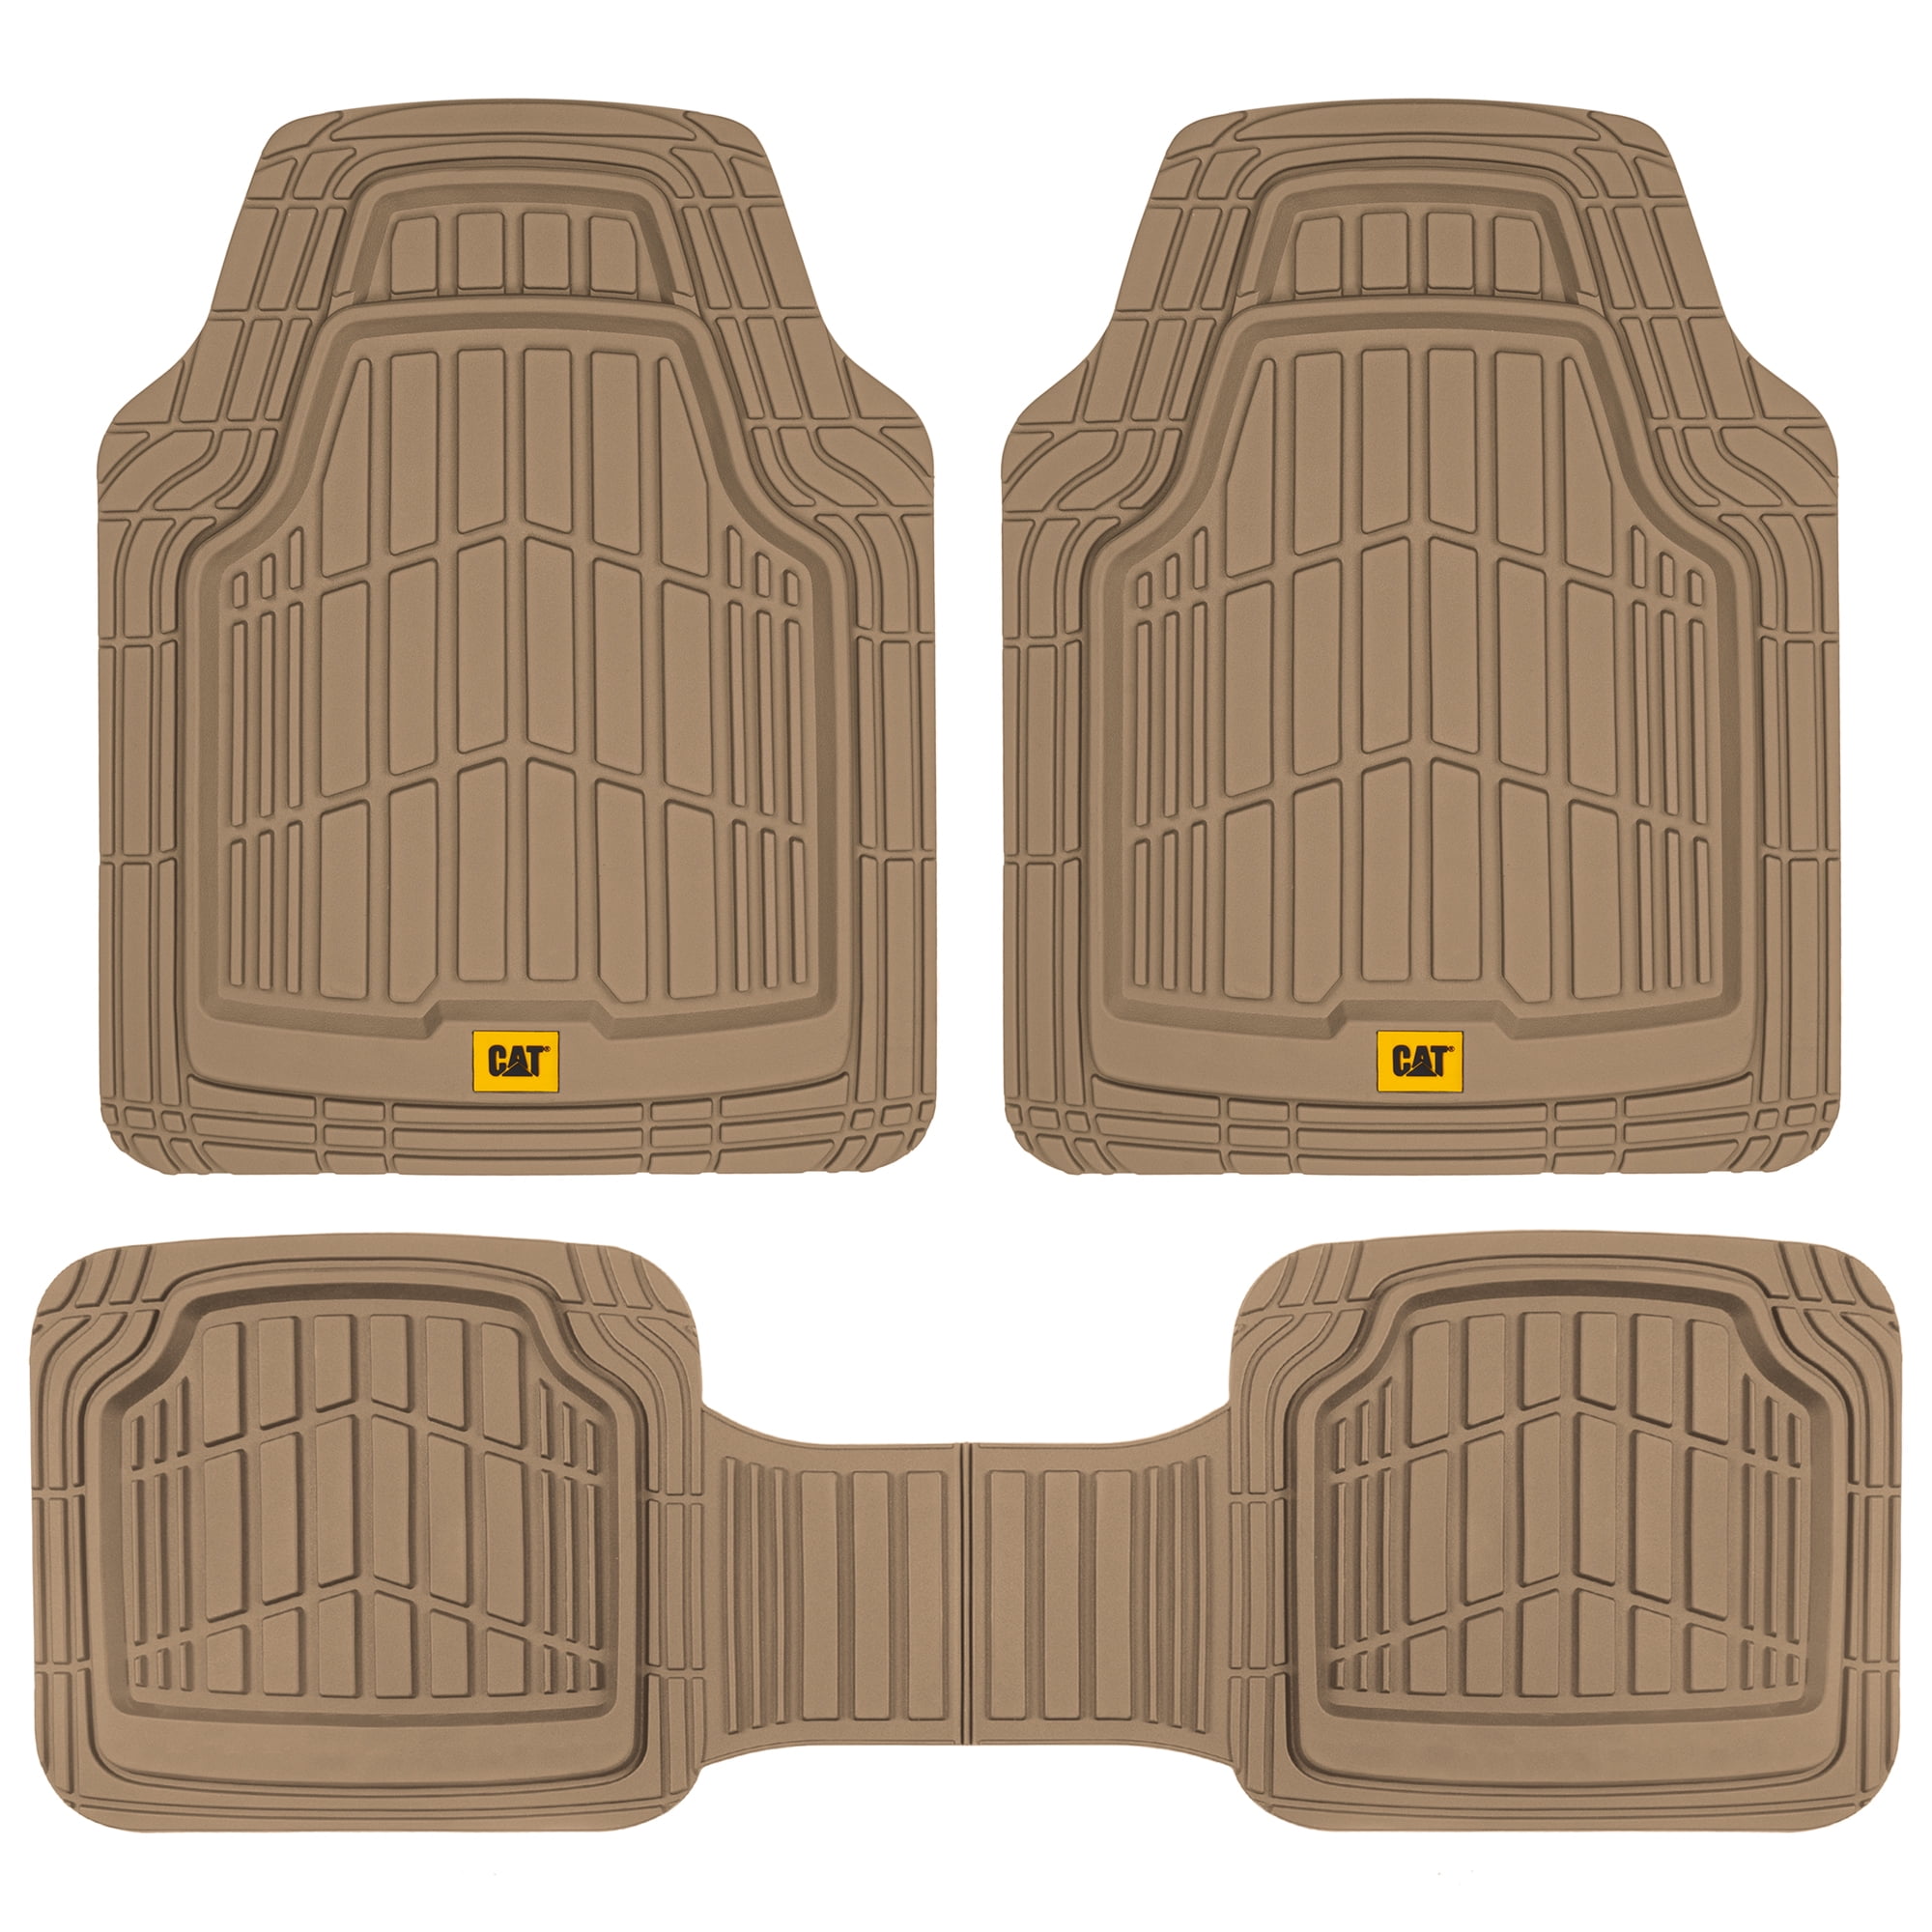 2 Piece Universal RV Floor Mats Made From Top Quality Cut-pile